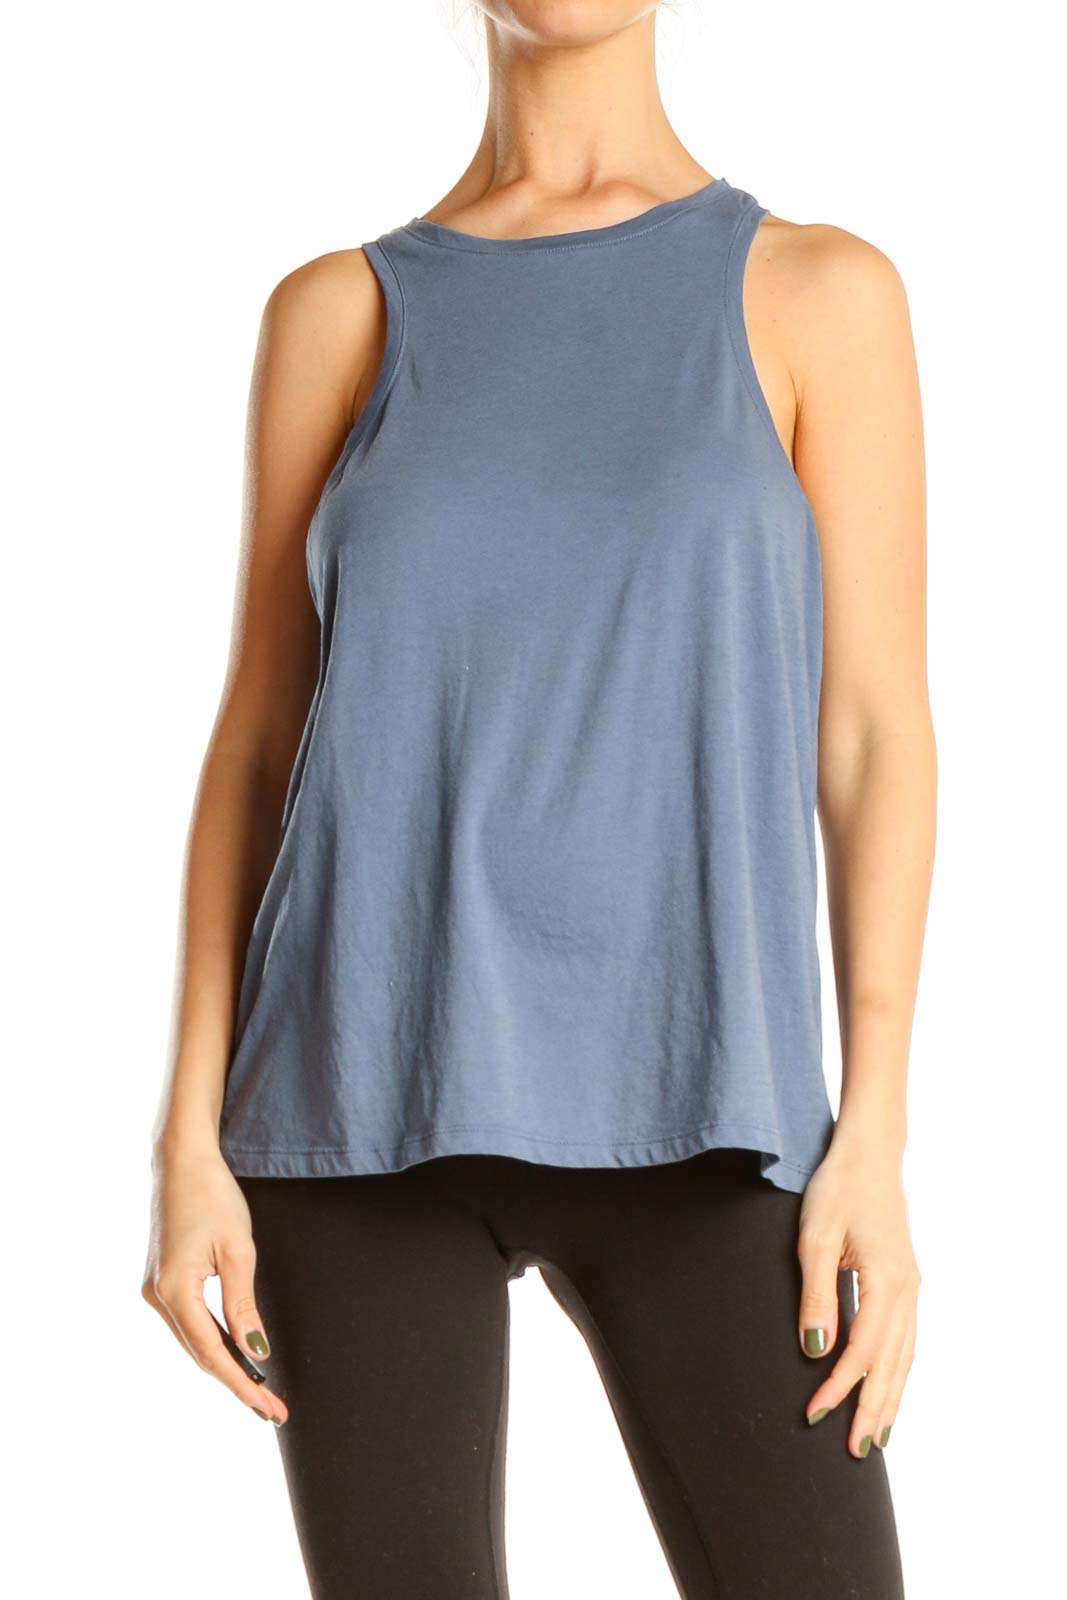 Blue Tank Top Front